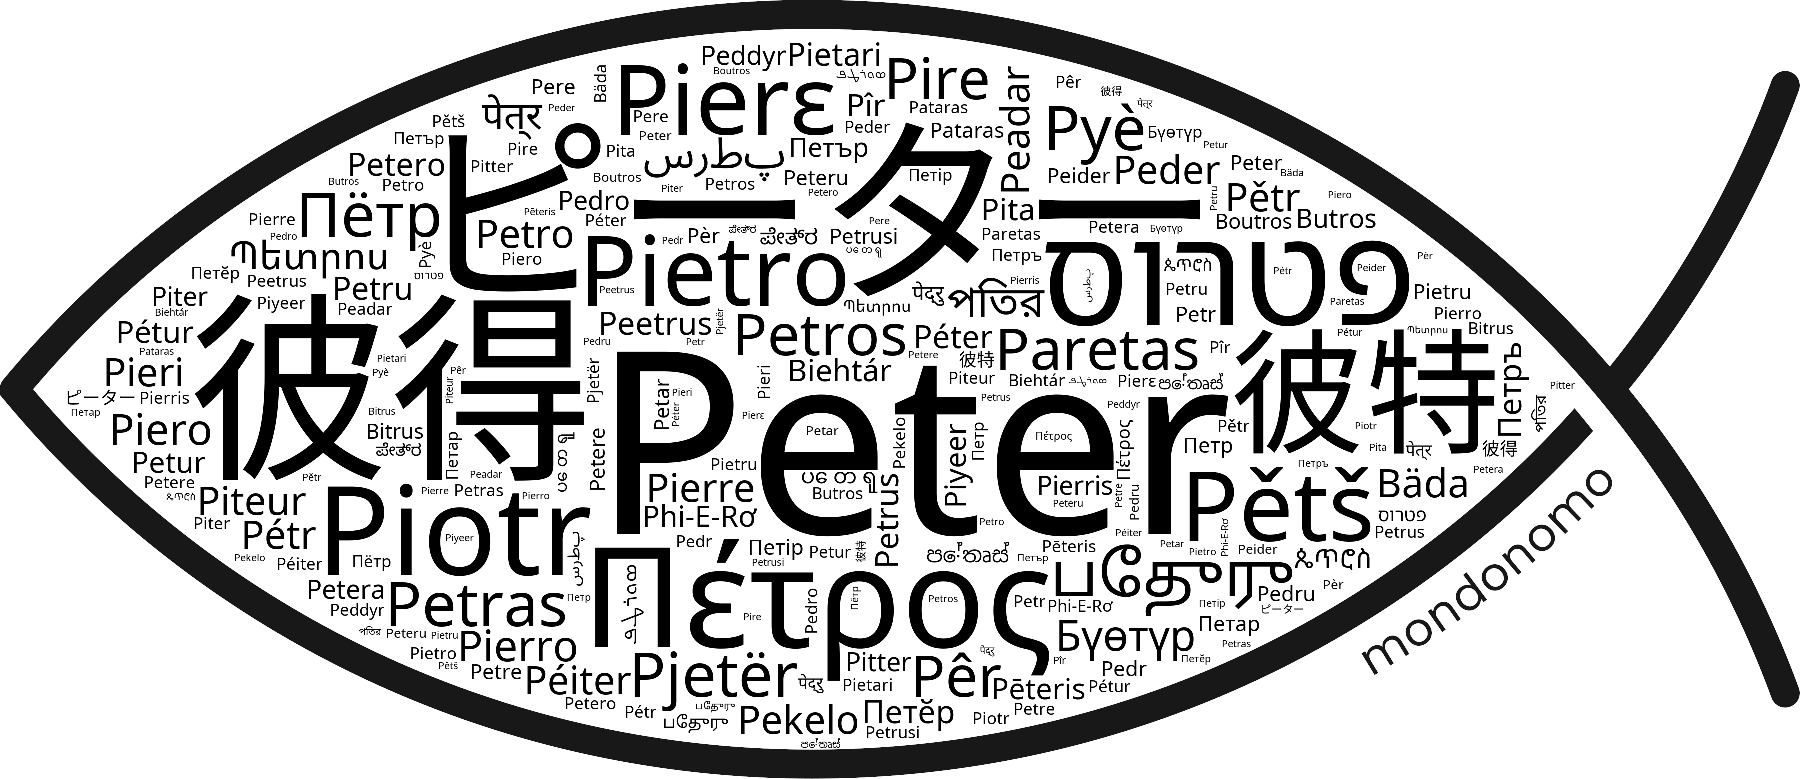 Name Peter in the world's Bibles